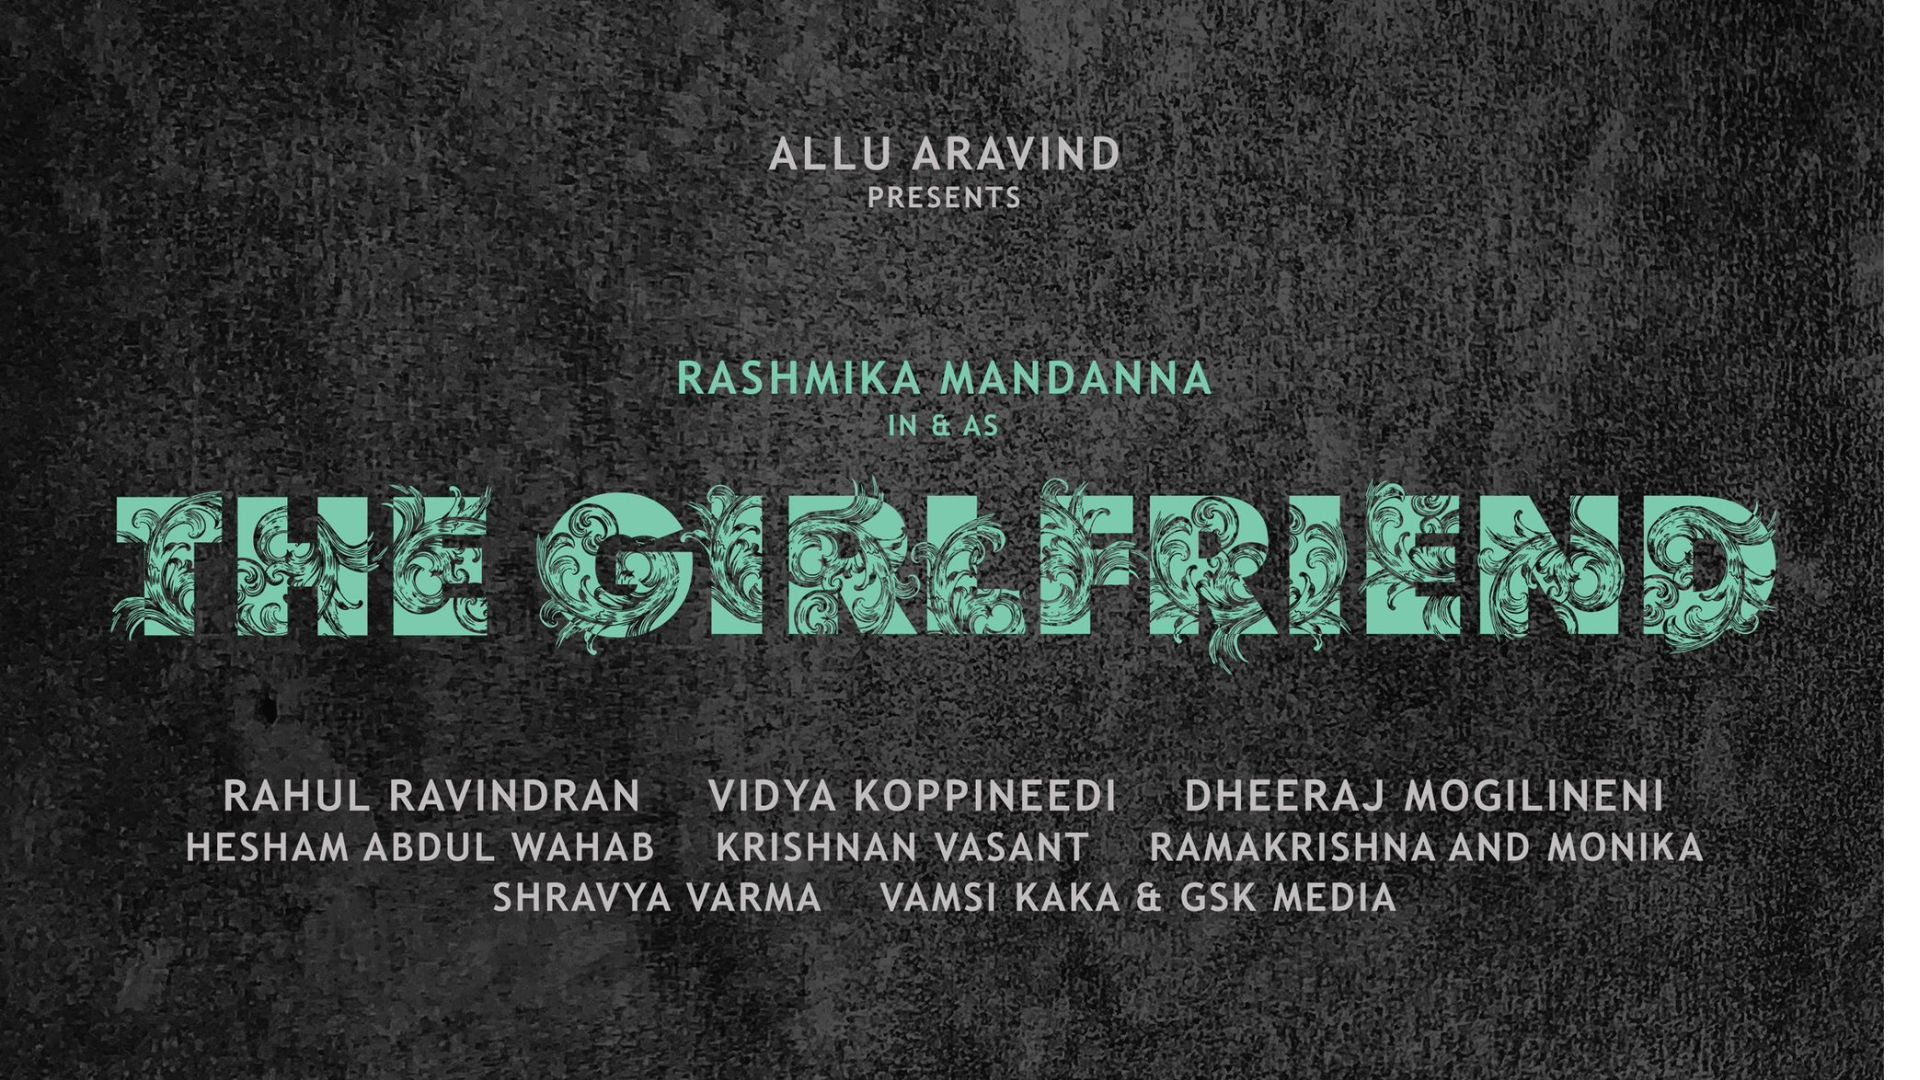 The Girlfriend, starring Rashmika Mandanna, has unveiled its initial promotional poster.